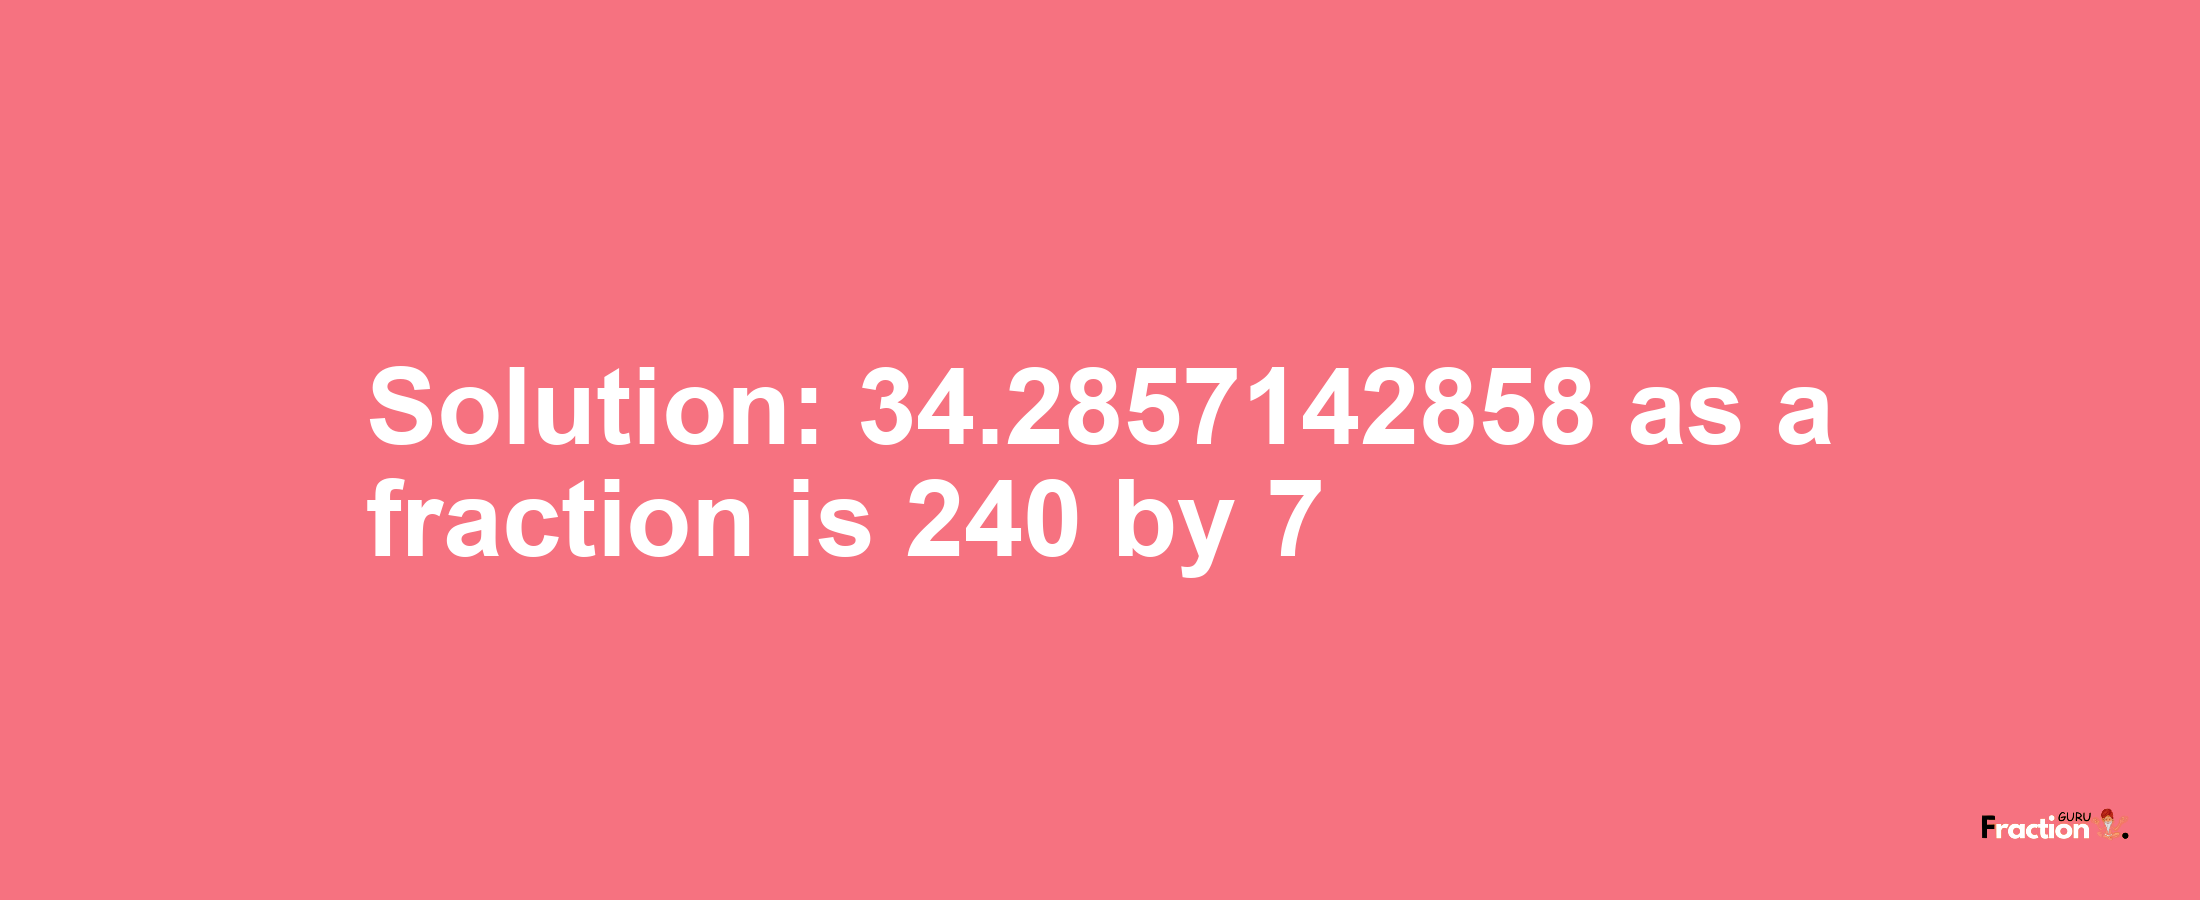 Solution:34.2857142858 as a fraction is 240/7